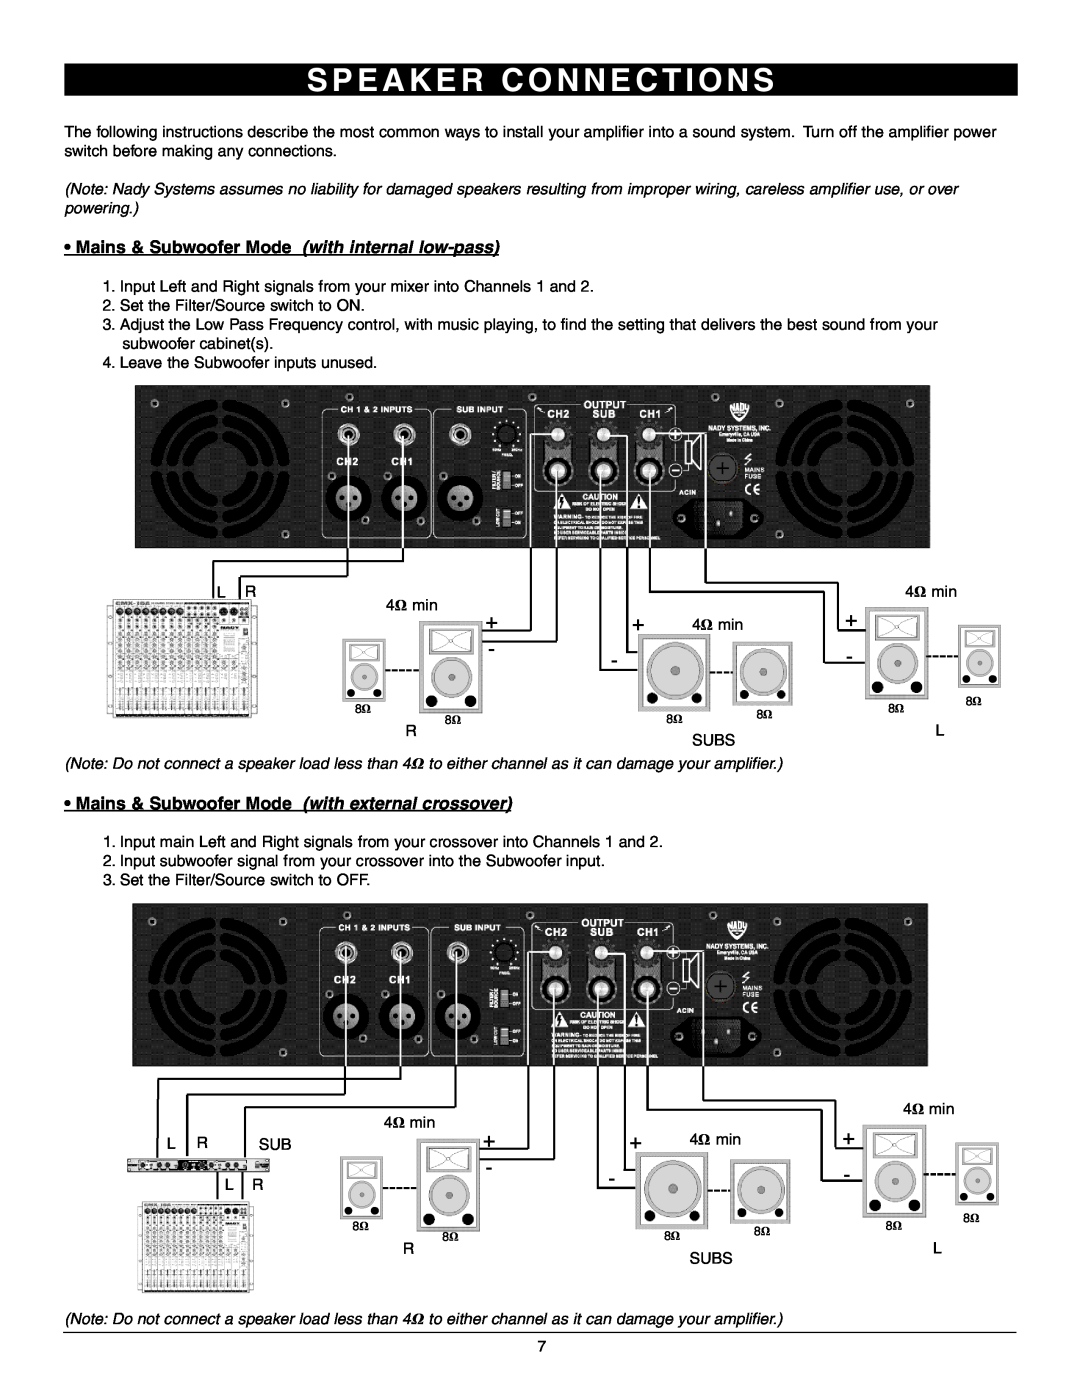 Nady Systems 3WA1700 owner manual S P E A K E R C O N N E C T I O N S, Mains & Subwoofer Mode with internal low-pass 